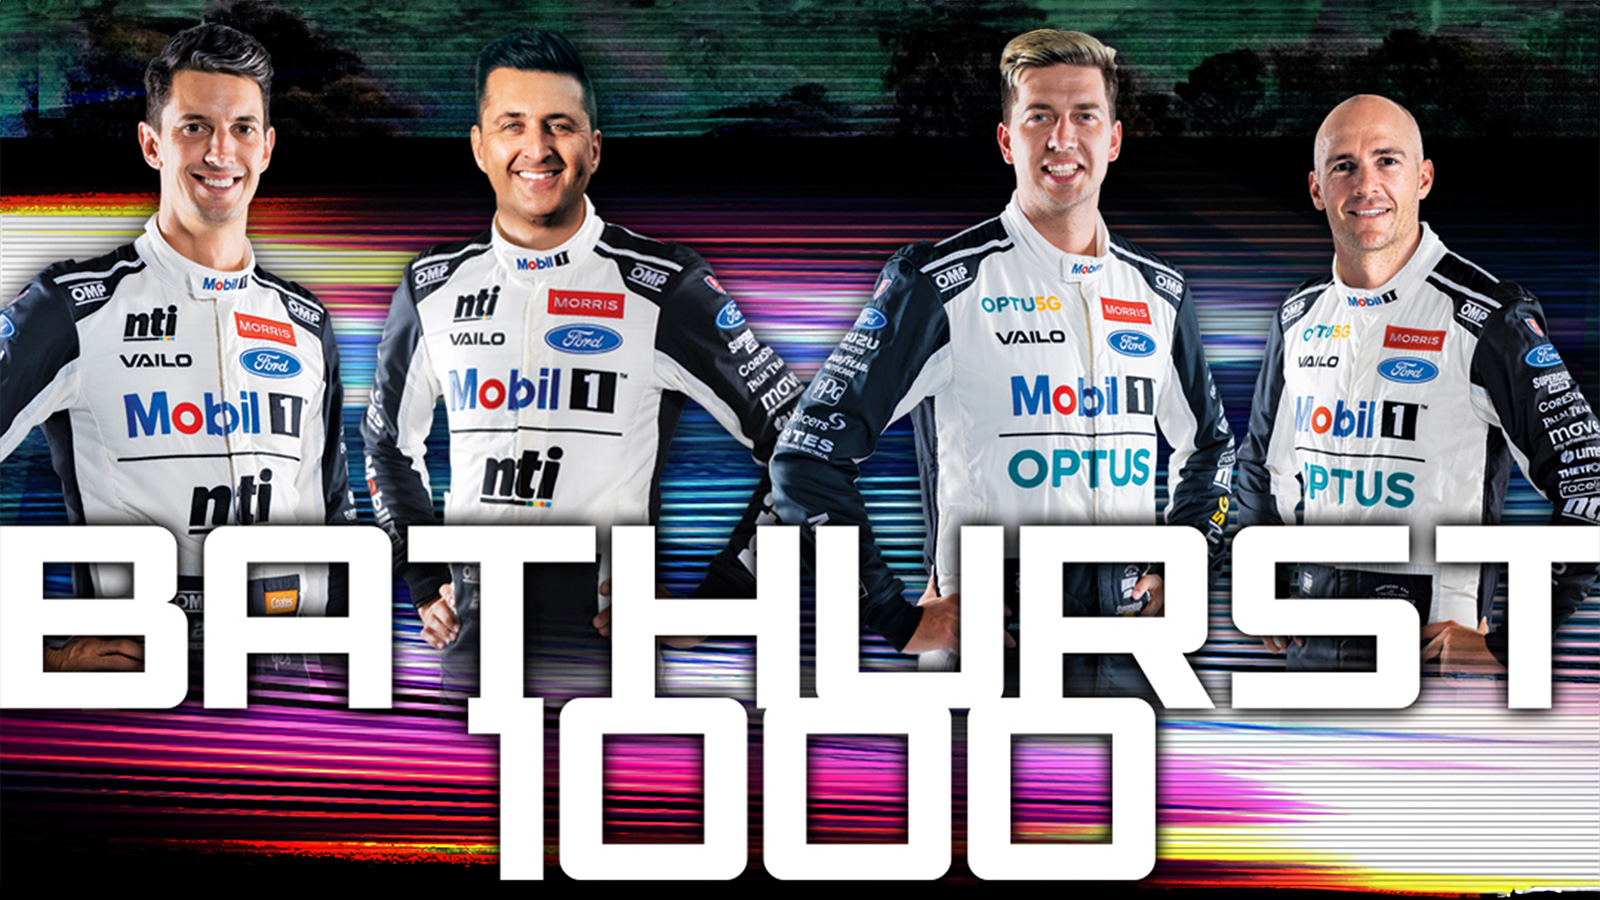 It’s the biggest race of the year, the Bathurst 1000!